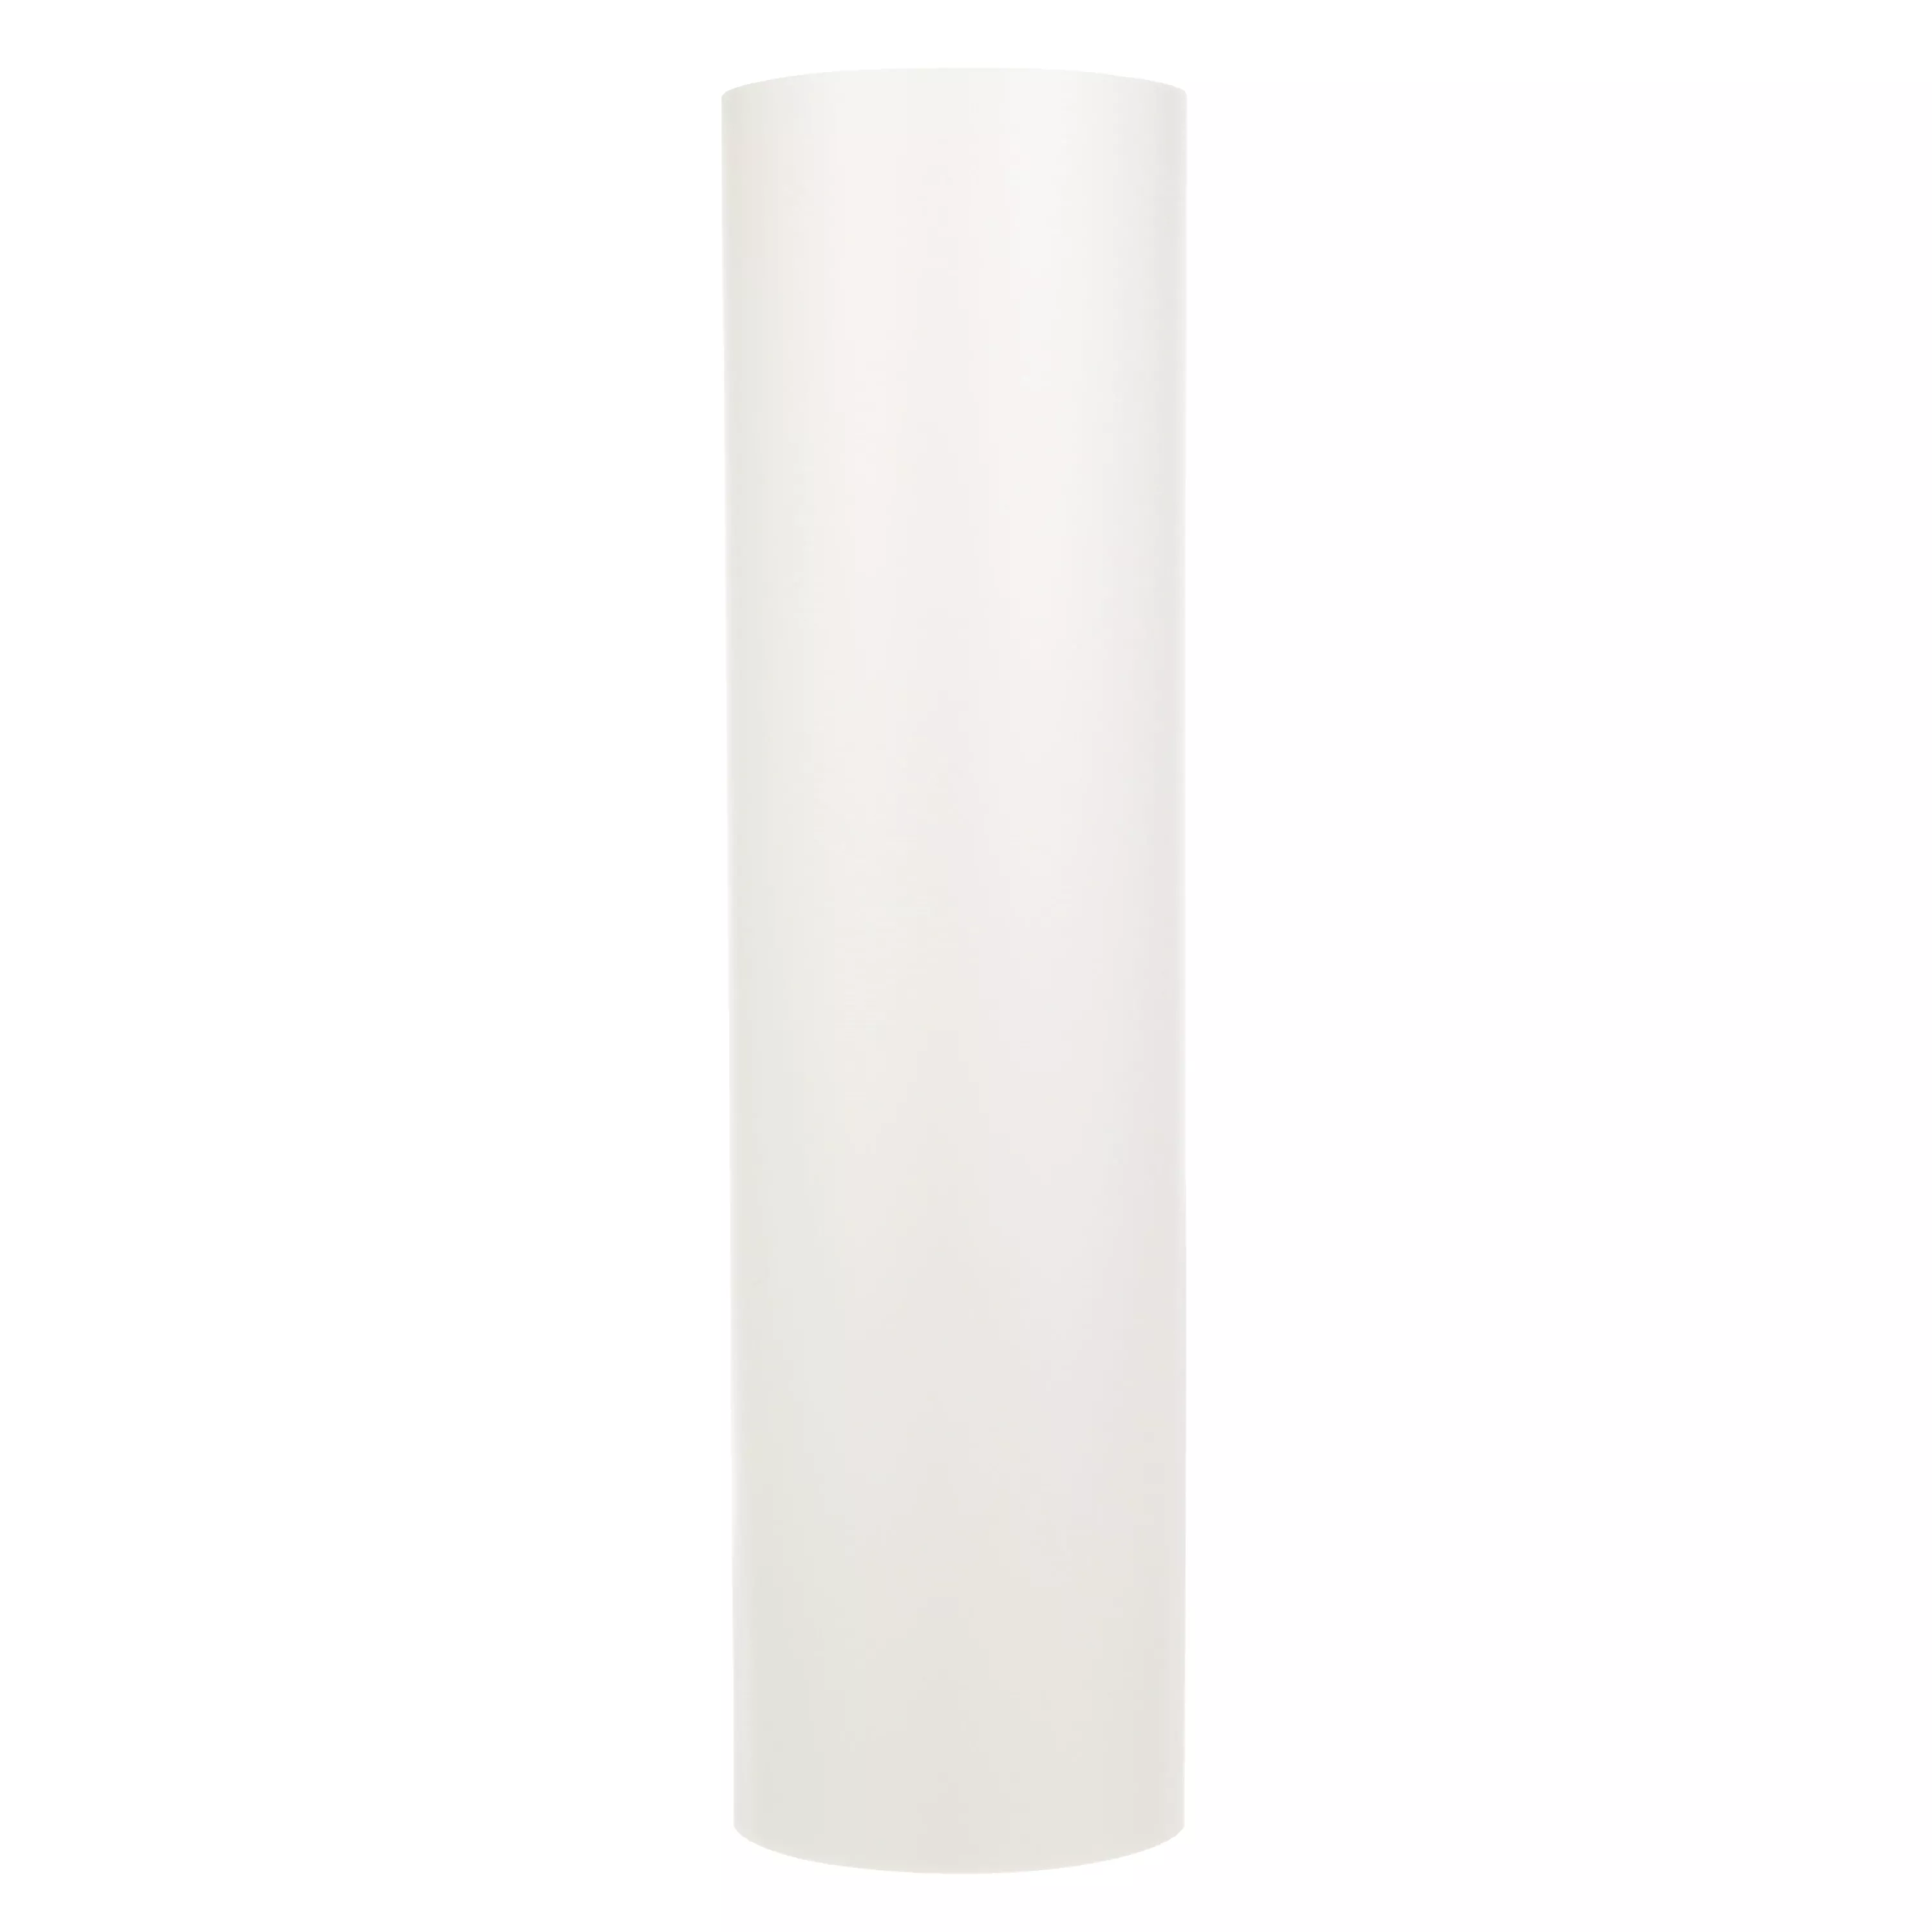 3M™ Silicone Secondary Release Liner 4997, White, 48 in X 180 yd, 4 mil,
1 roll per case